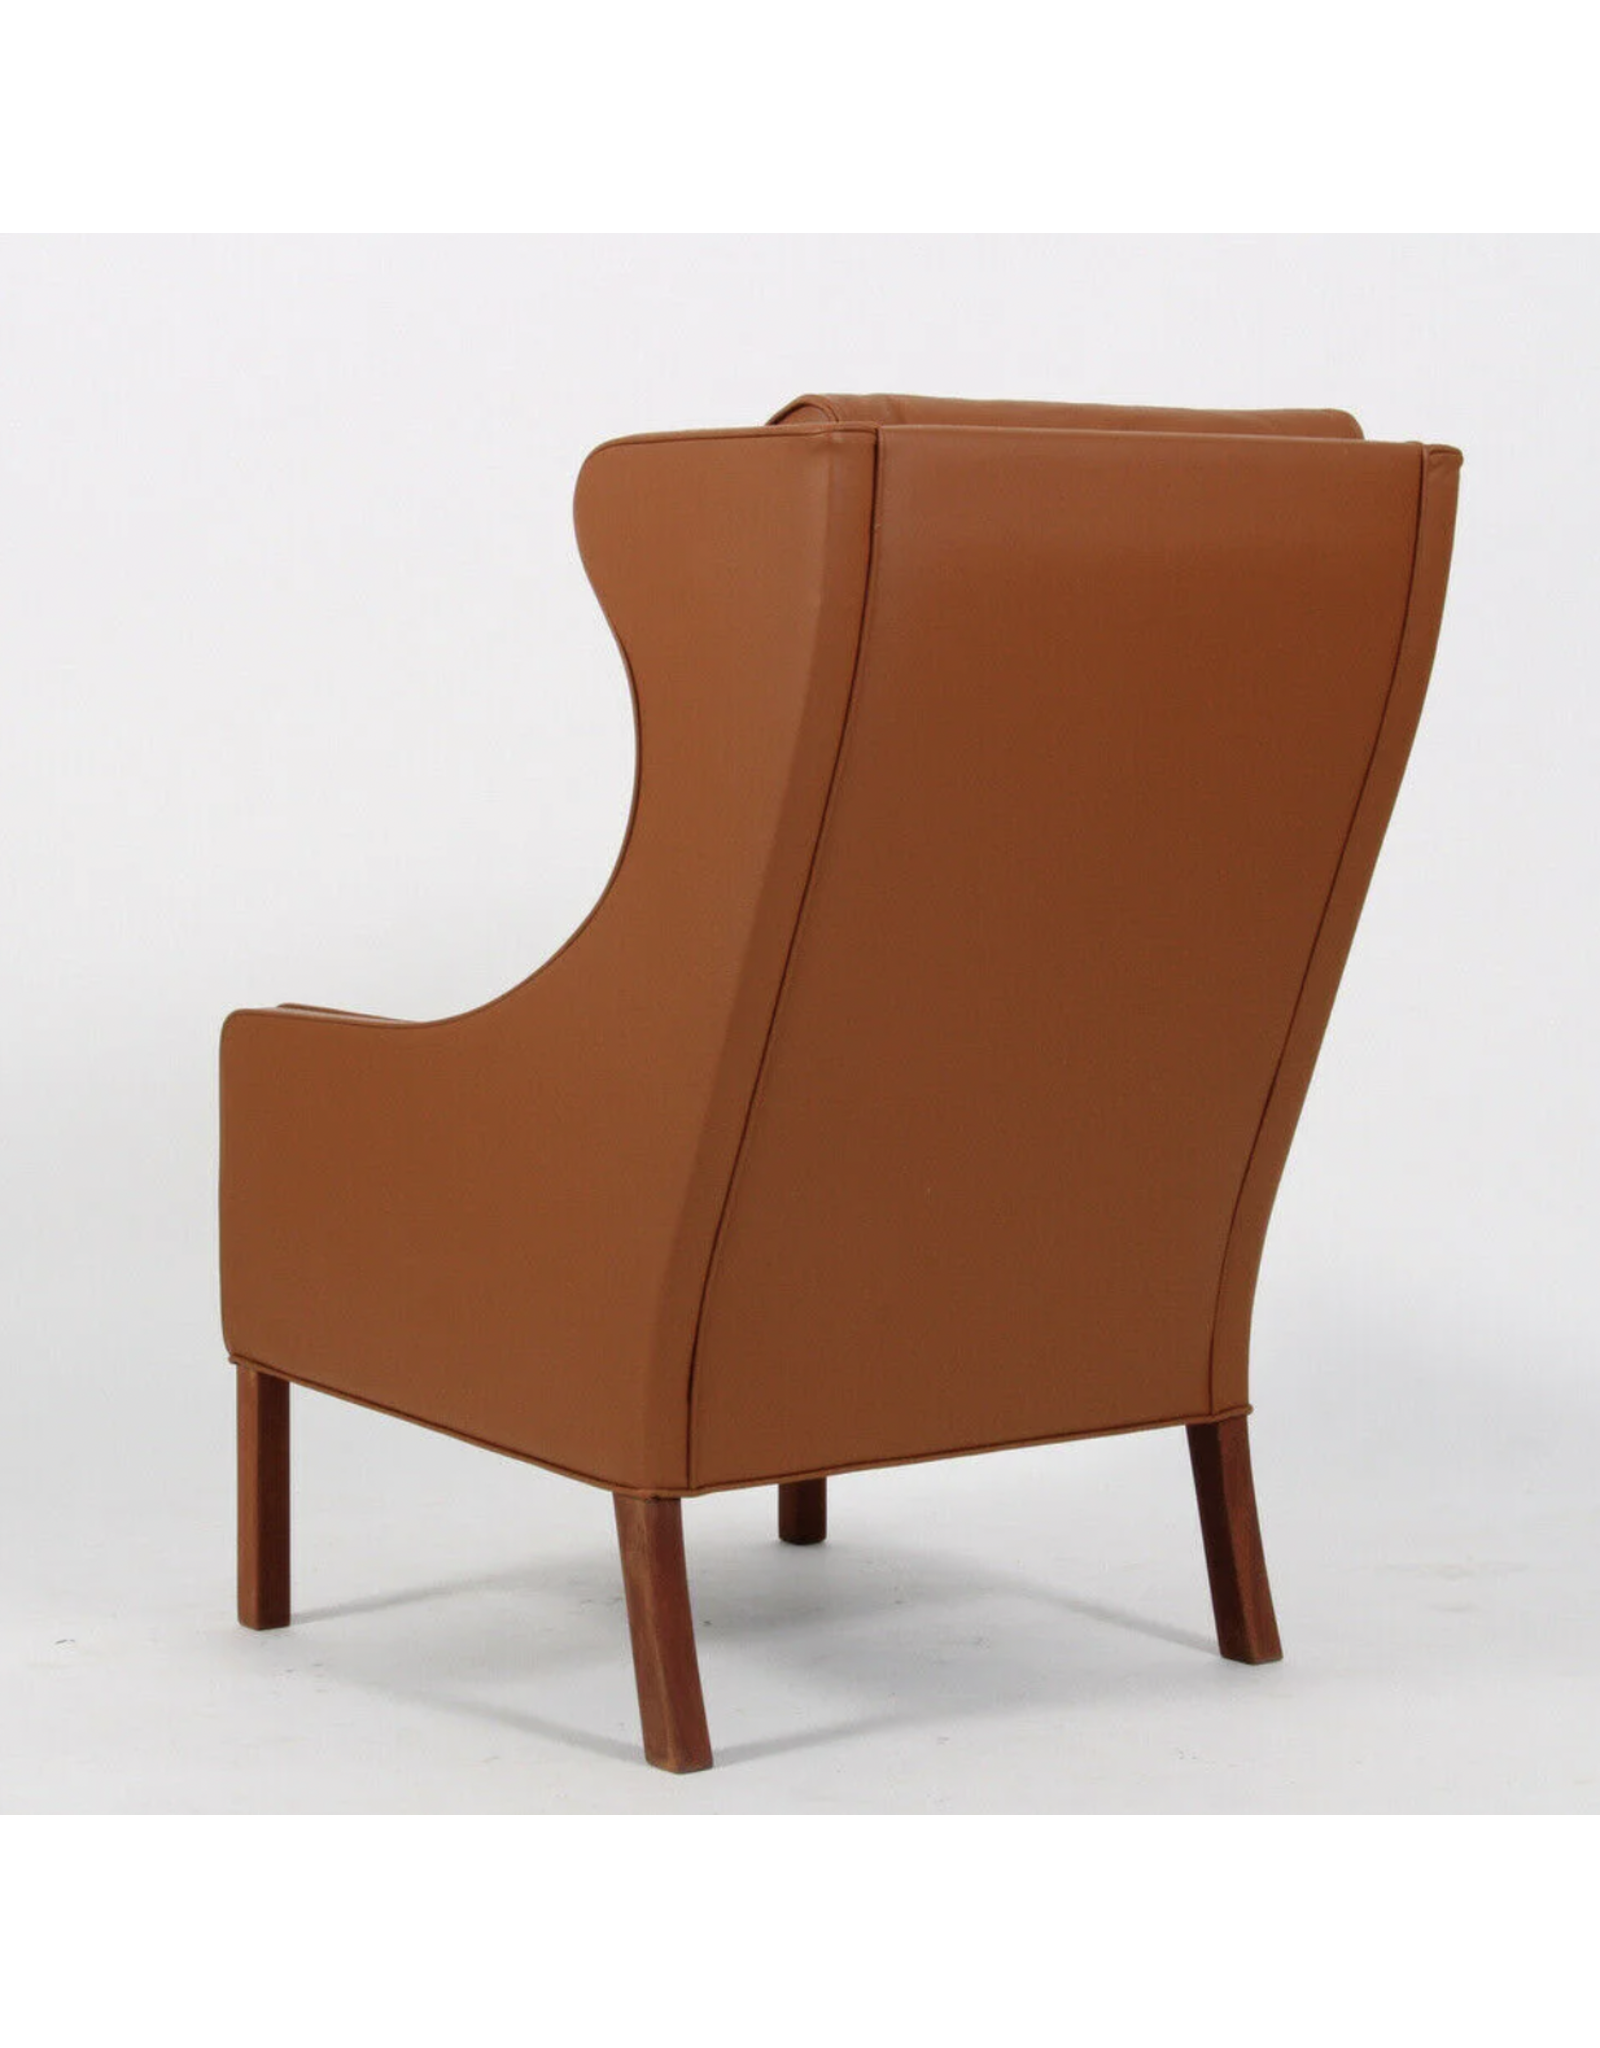 2204 THE WING CHAIR IN COGNAC LEATHER